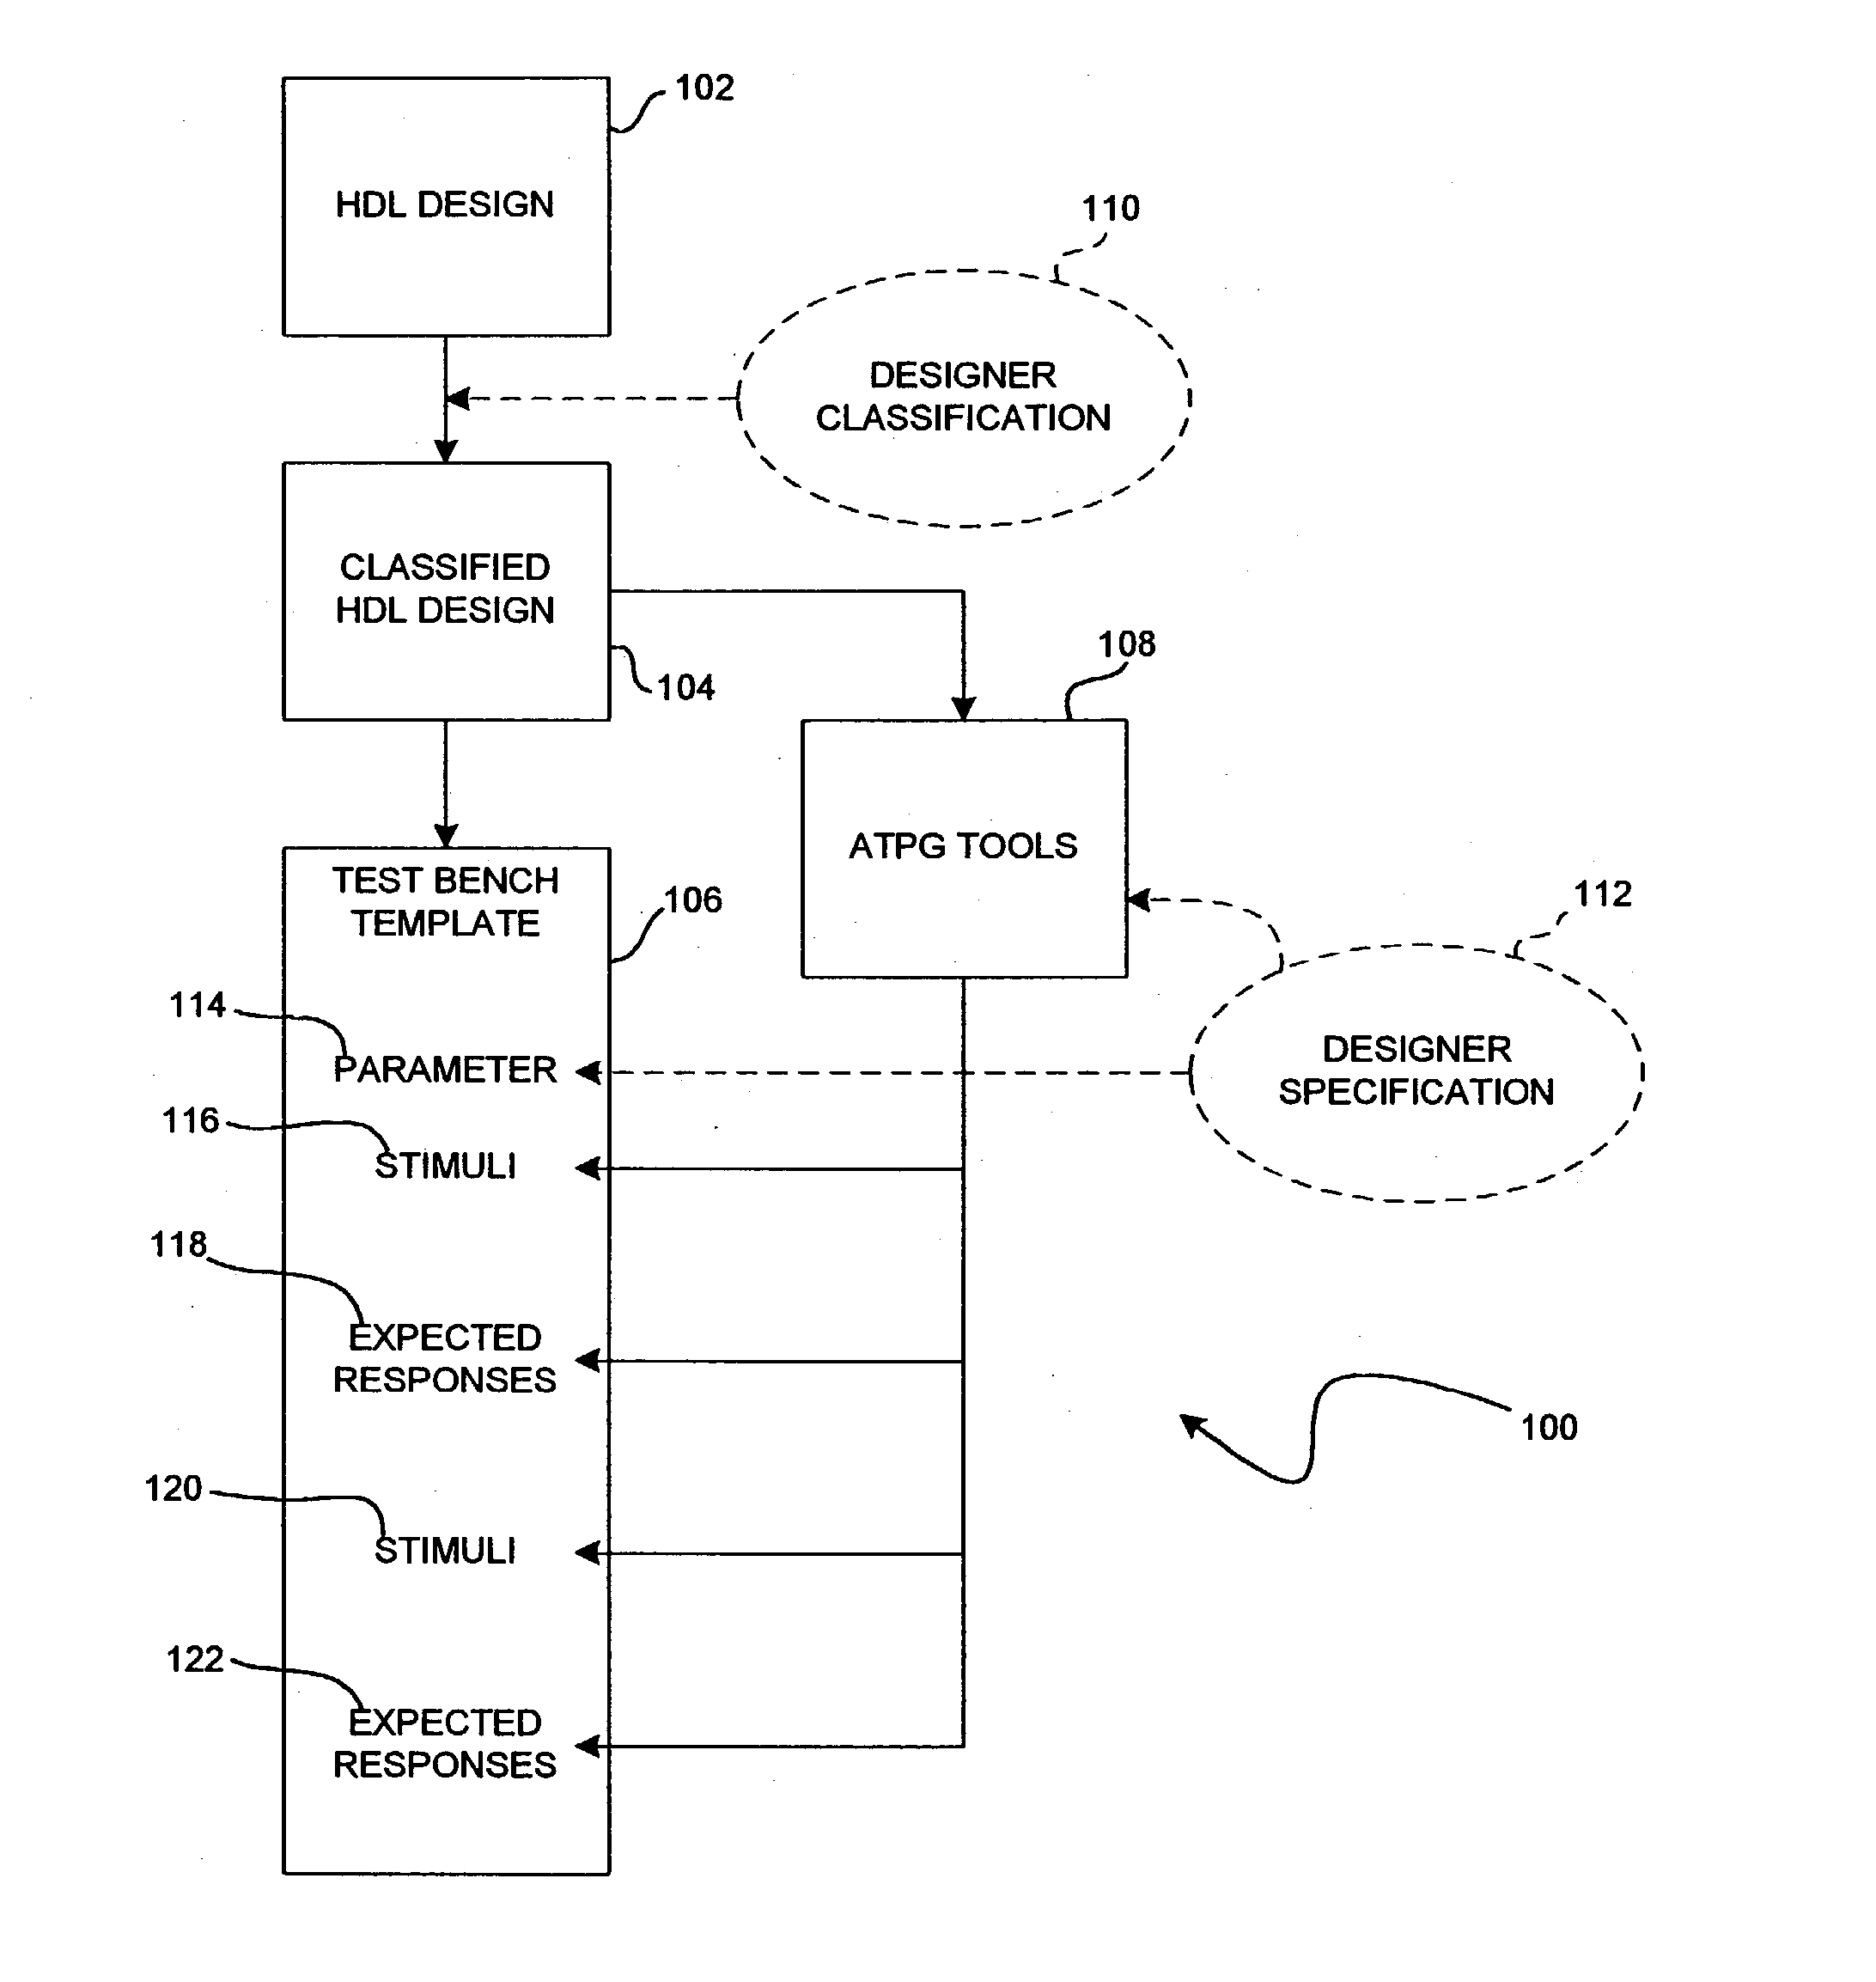 Method for creating a design verification test bench